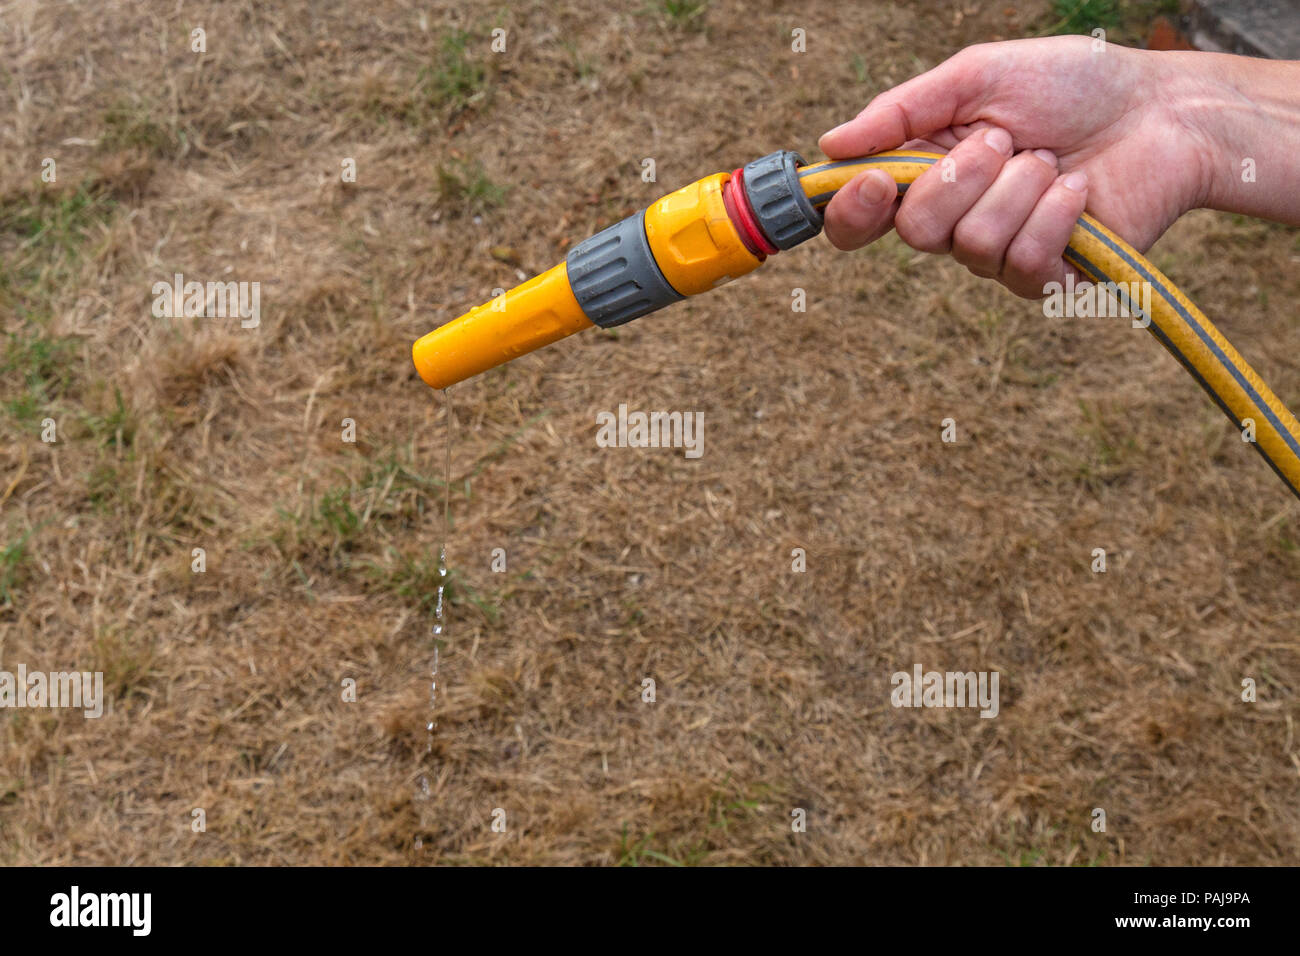 A garden hose pipe attempting to water a dry, brown, area of grass lawn, but only a few drops of water coming from hose. Single hand in view. Stock Photo